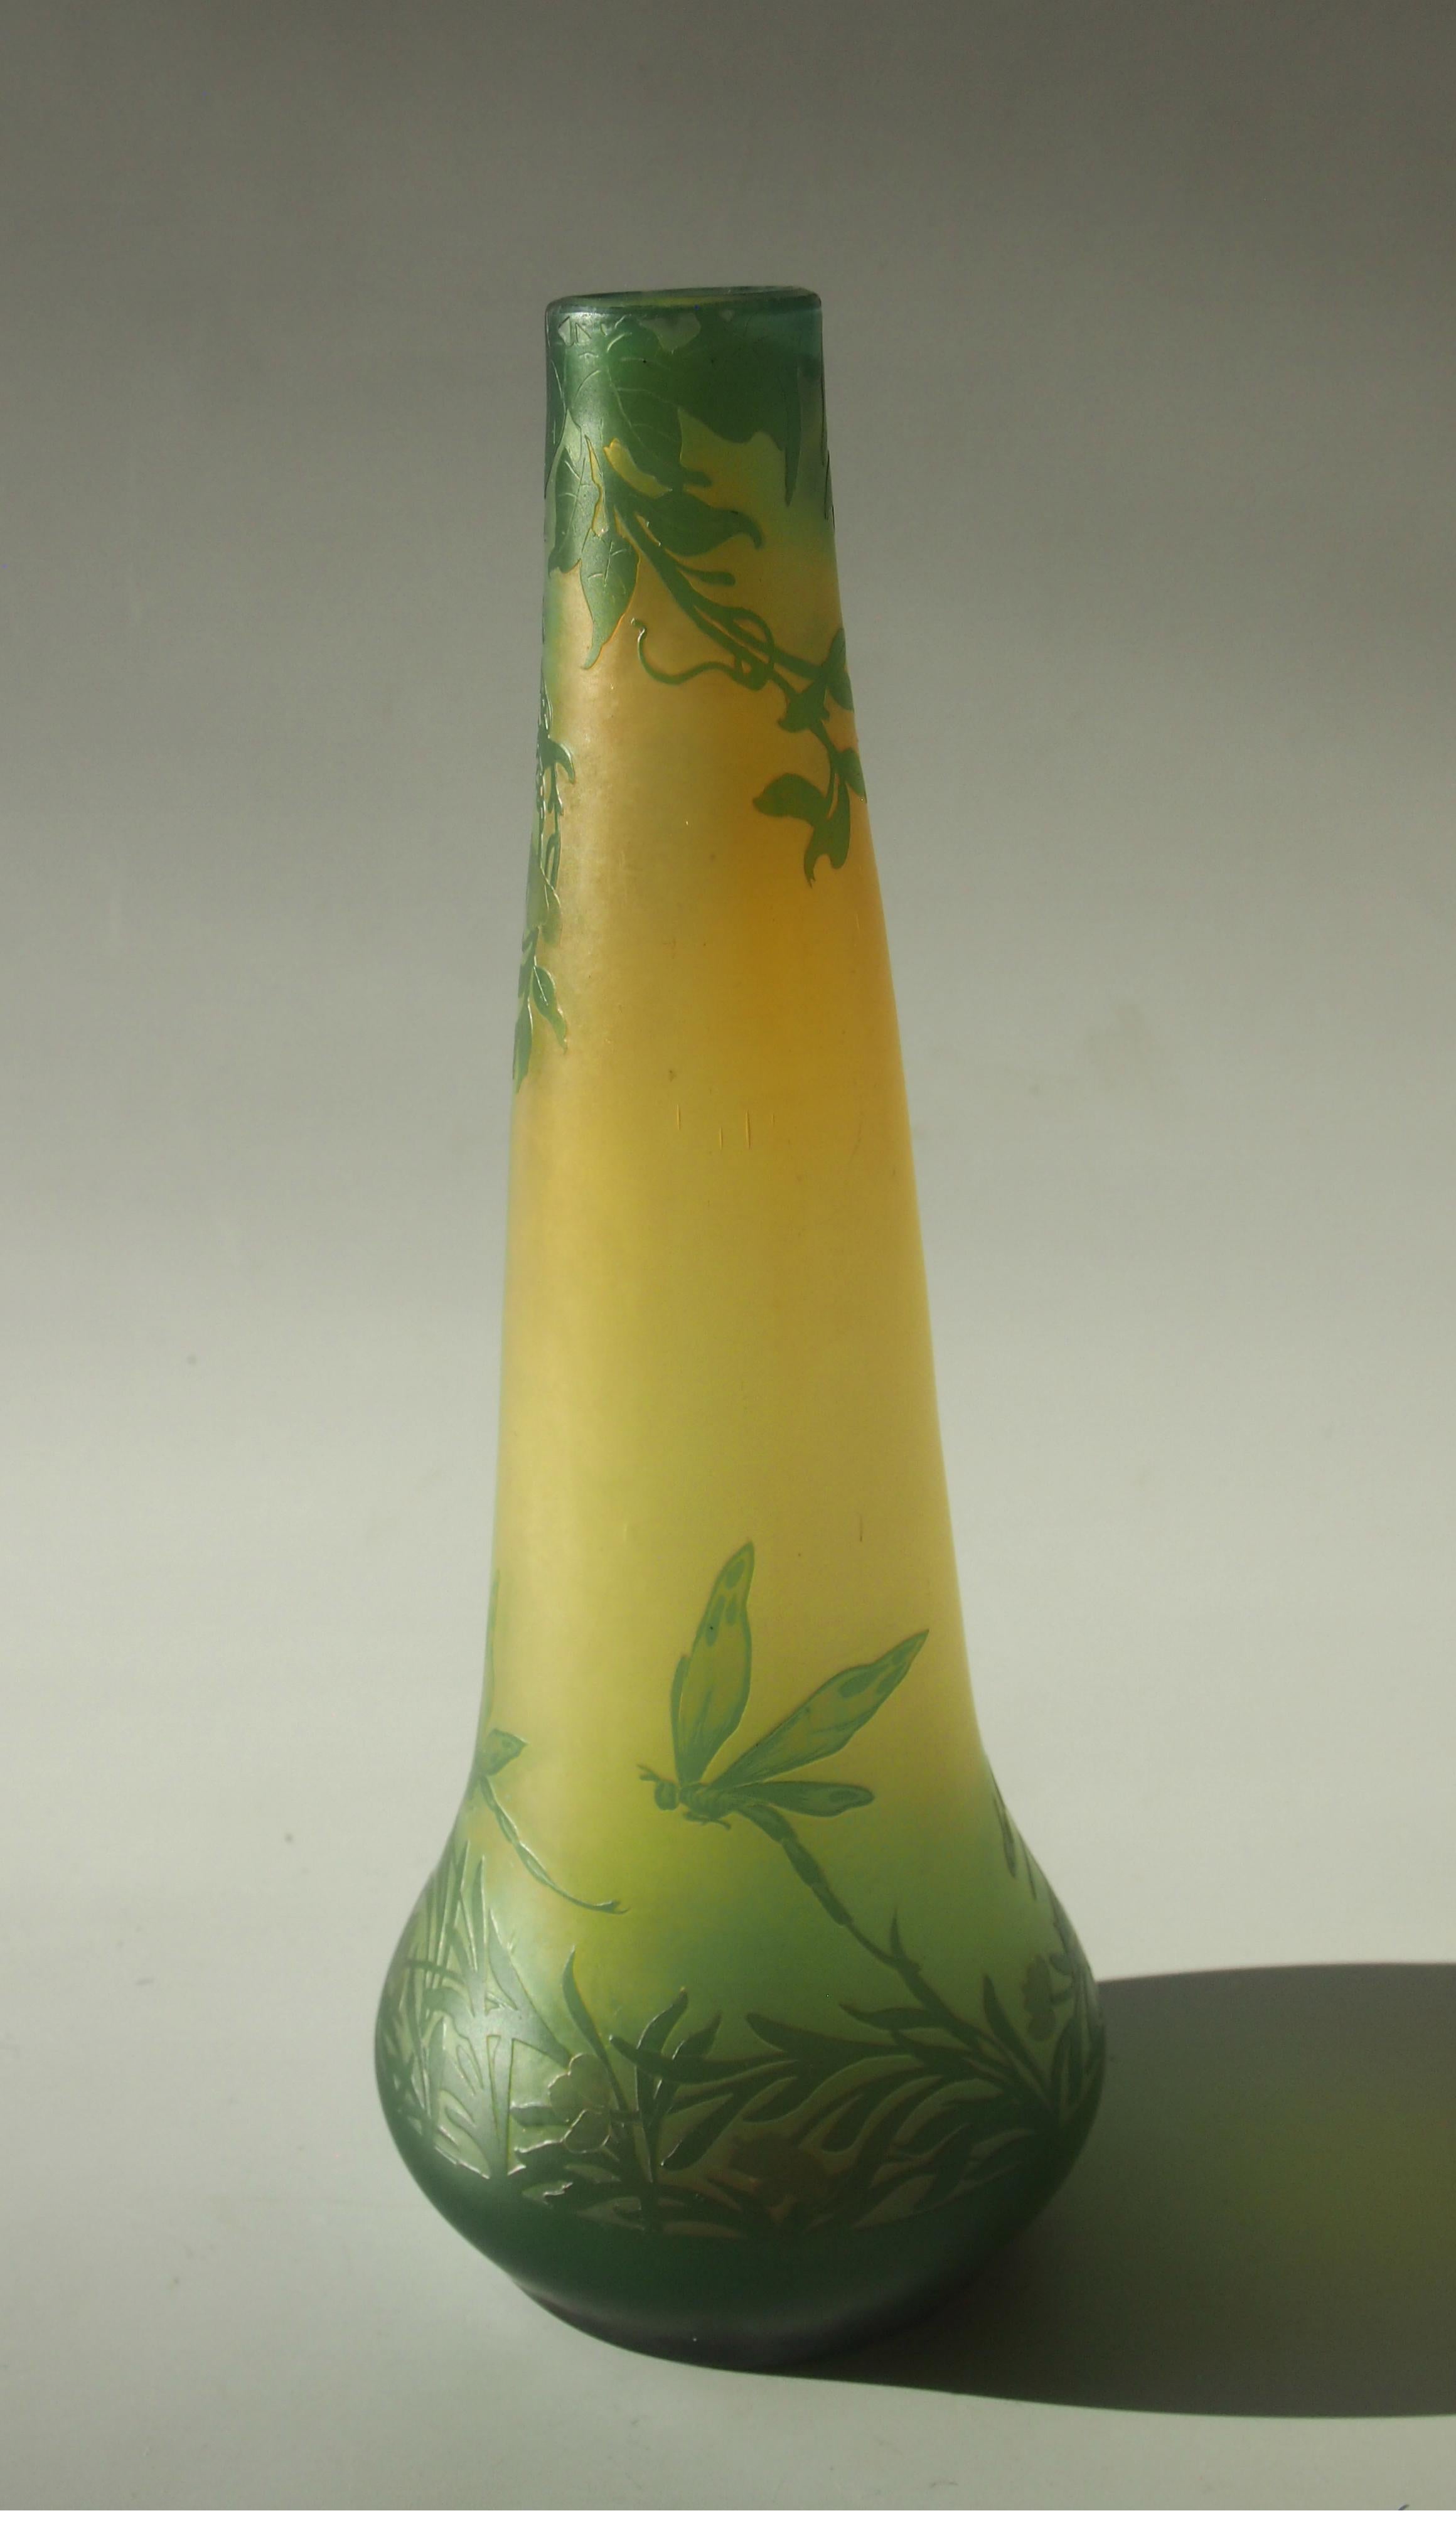 Superb French Art Nouveau green, yellow and peach cameo glass vase by Cristallerie De Pantin depicting flowers and dragonflies. Nicely signed Devez in cameo see image 3

Pantin was one of the great Paris based glass works, they signed most of